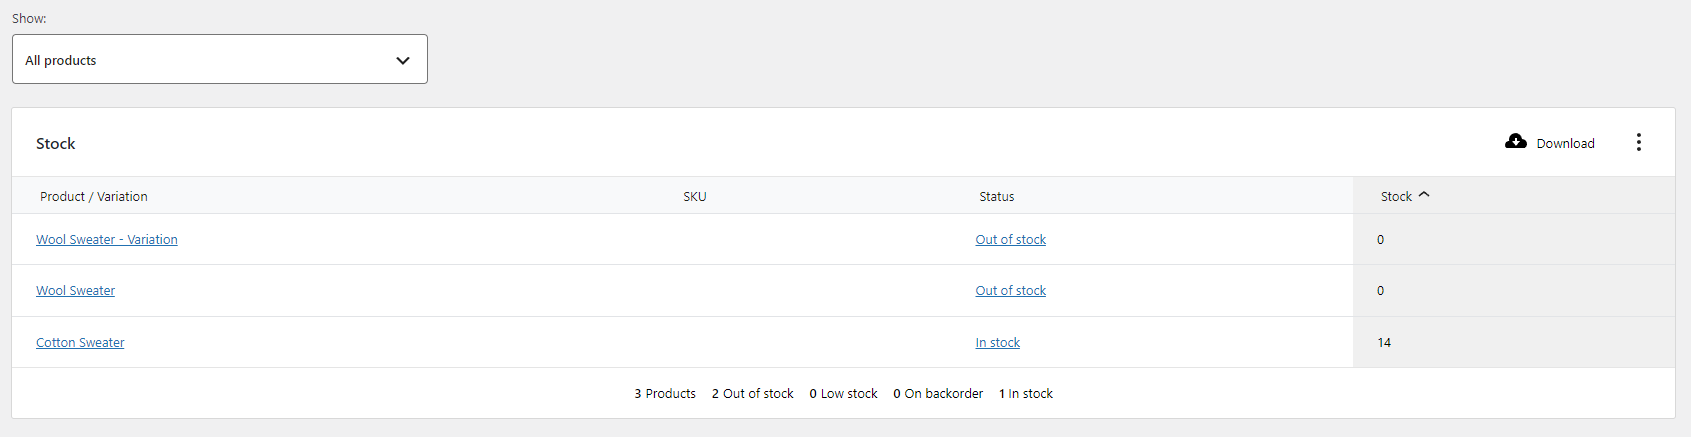 Viewing stock status reports in WooCommerce.